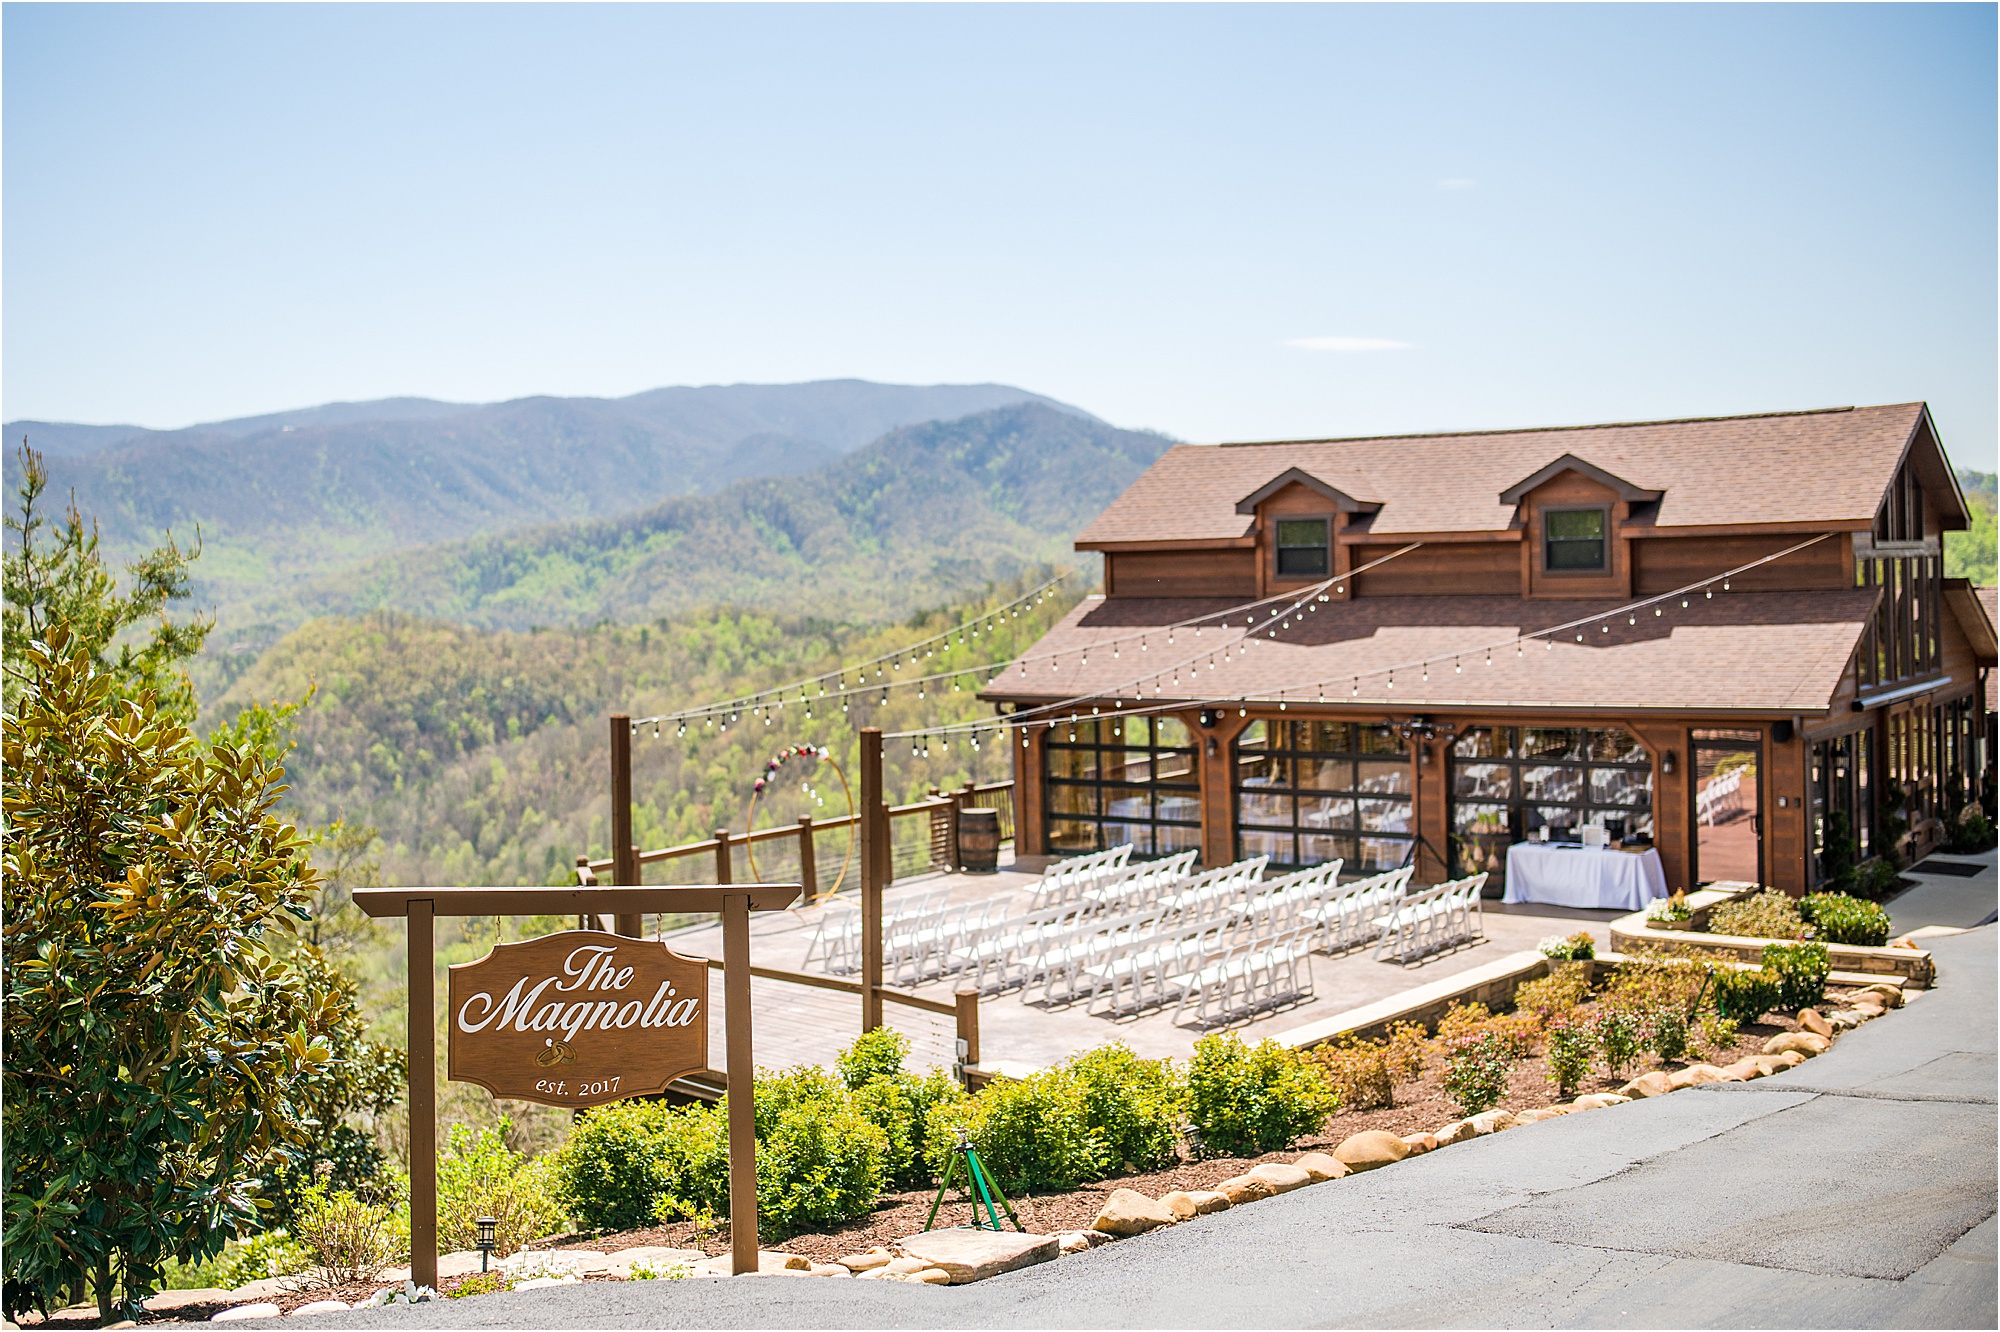 The Magnolia Venue in Pigeon Forge, Tennessee